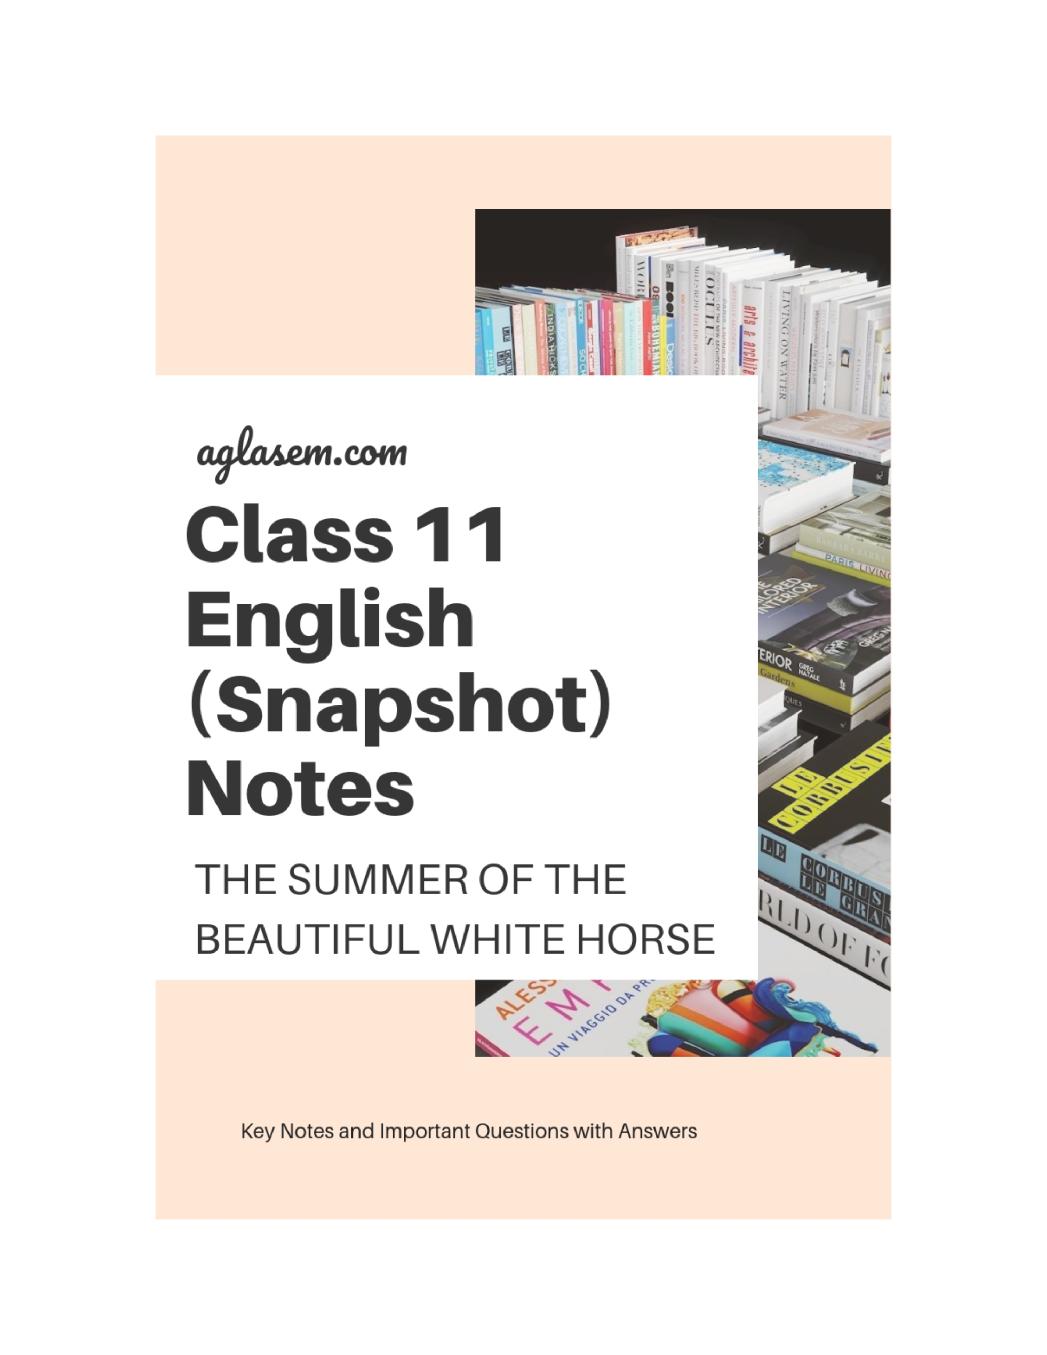 Class 11 English Snapshot Notes For The Summer of the Beautiful White Horse - Page 1